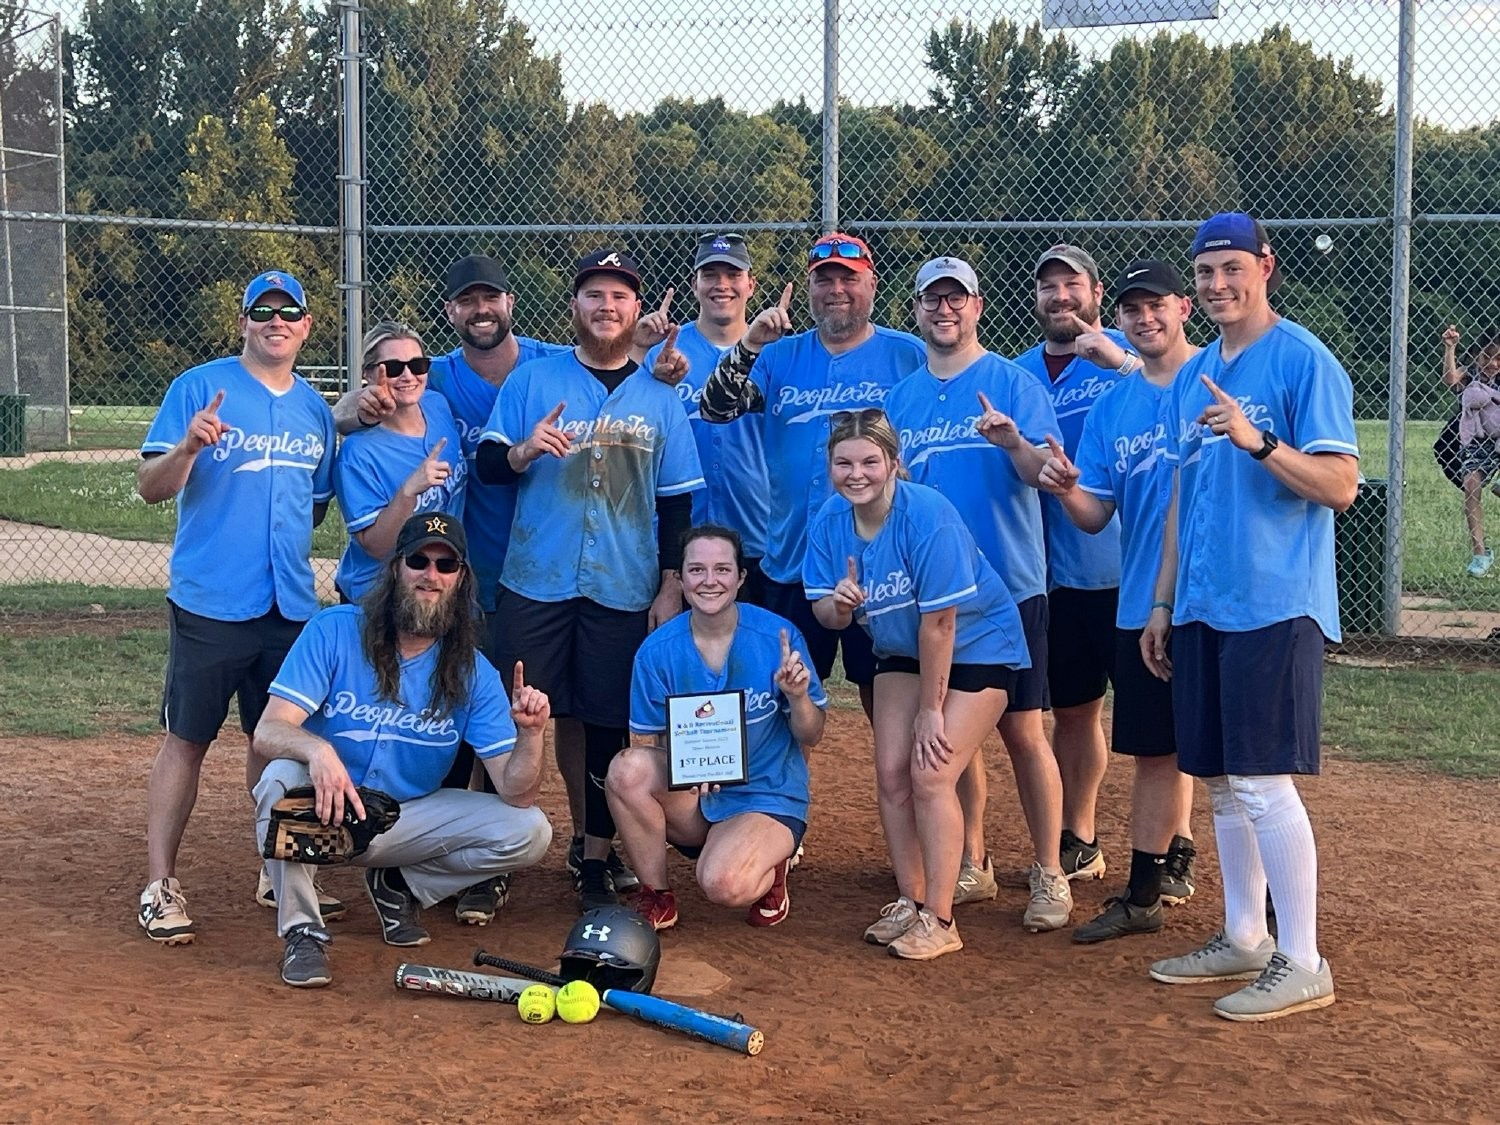 Team PeopleTec, your 2023 Research Park League Softball Champions!